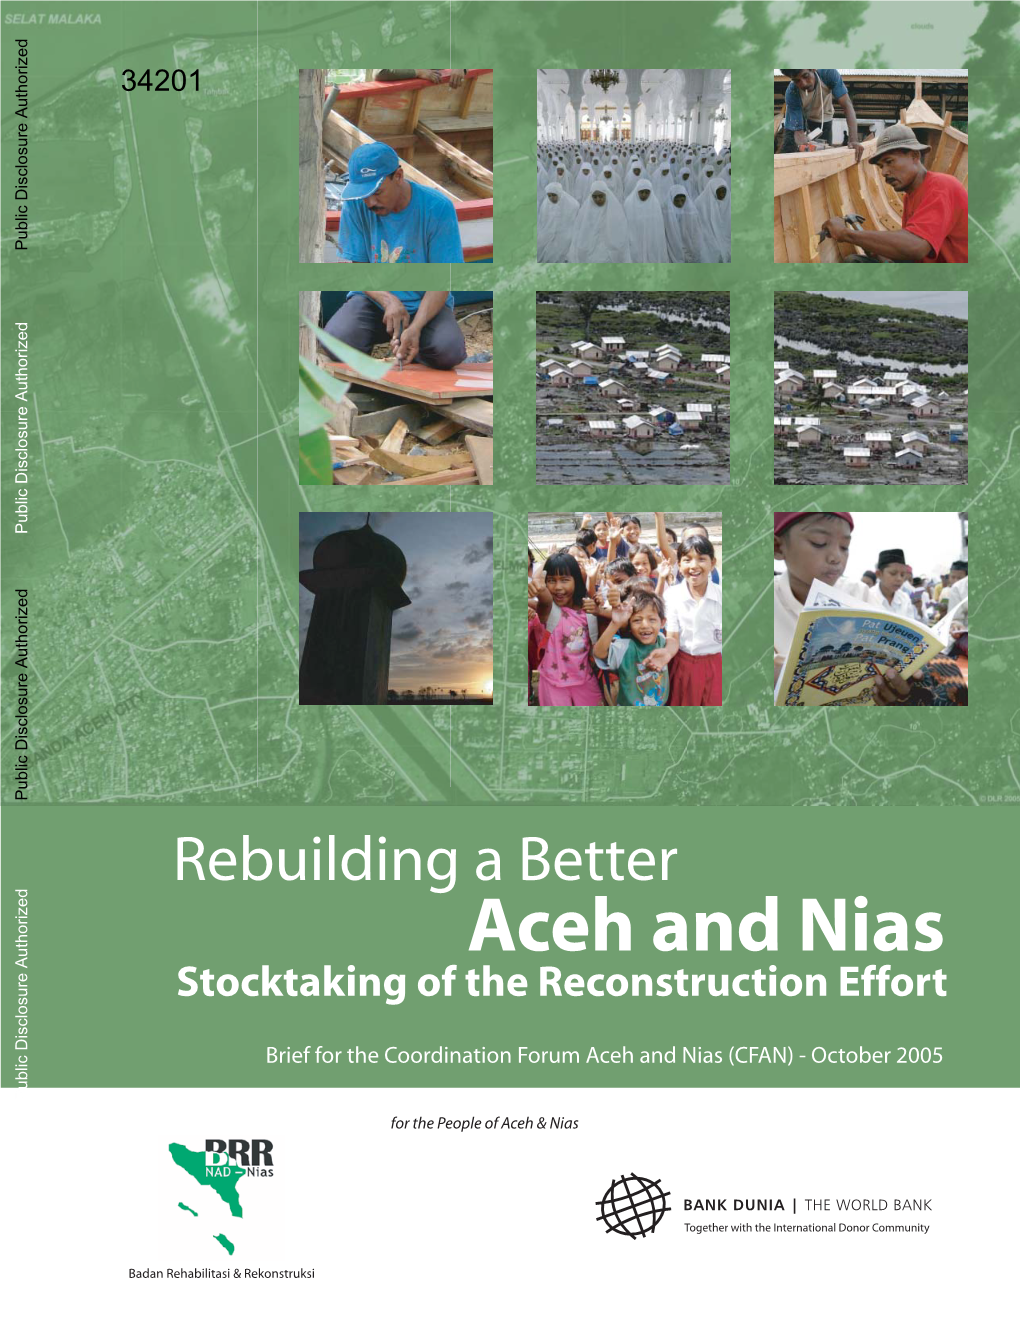 Rebuilding a Better Aceh and Nias Stocktaking of the Reconstruction Effort